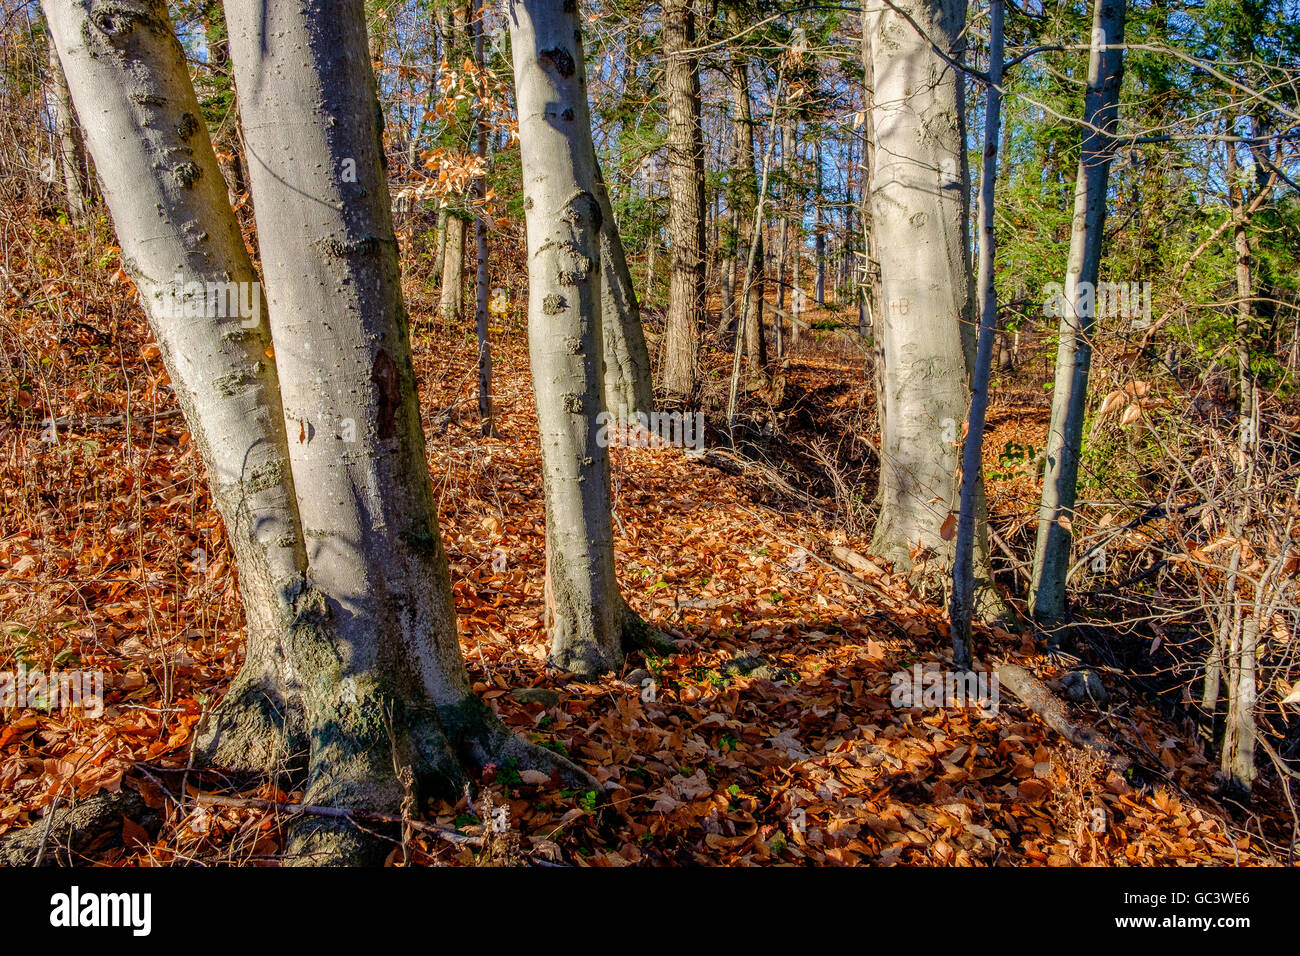 Smooth bark trees in the forest in the fall. Stock Photo